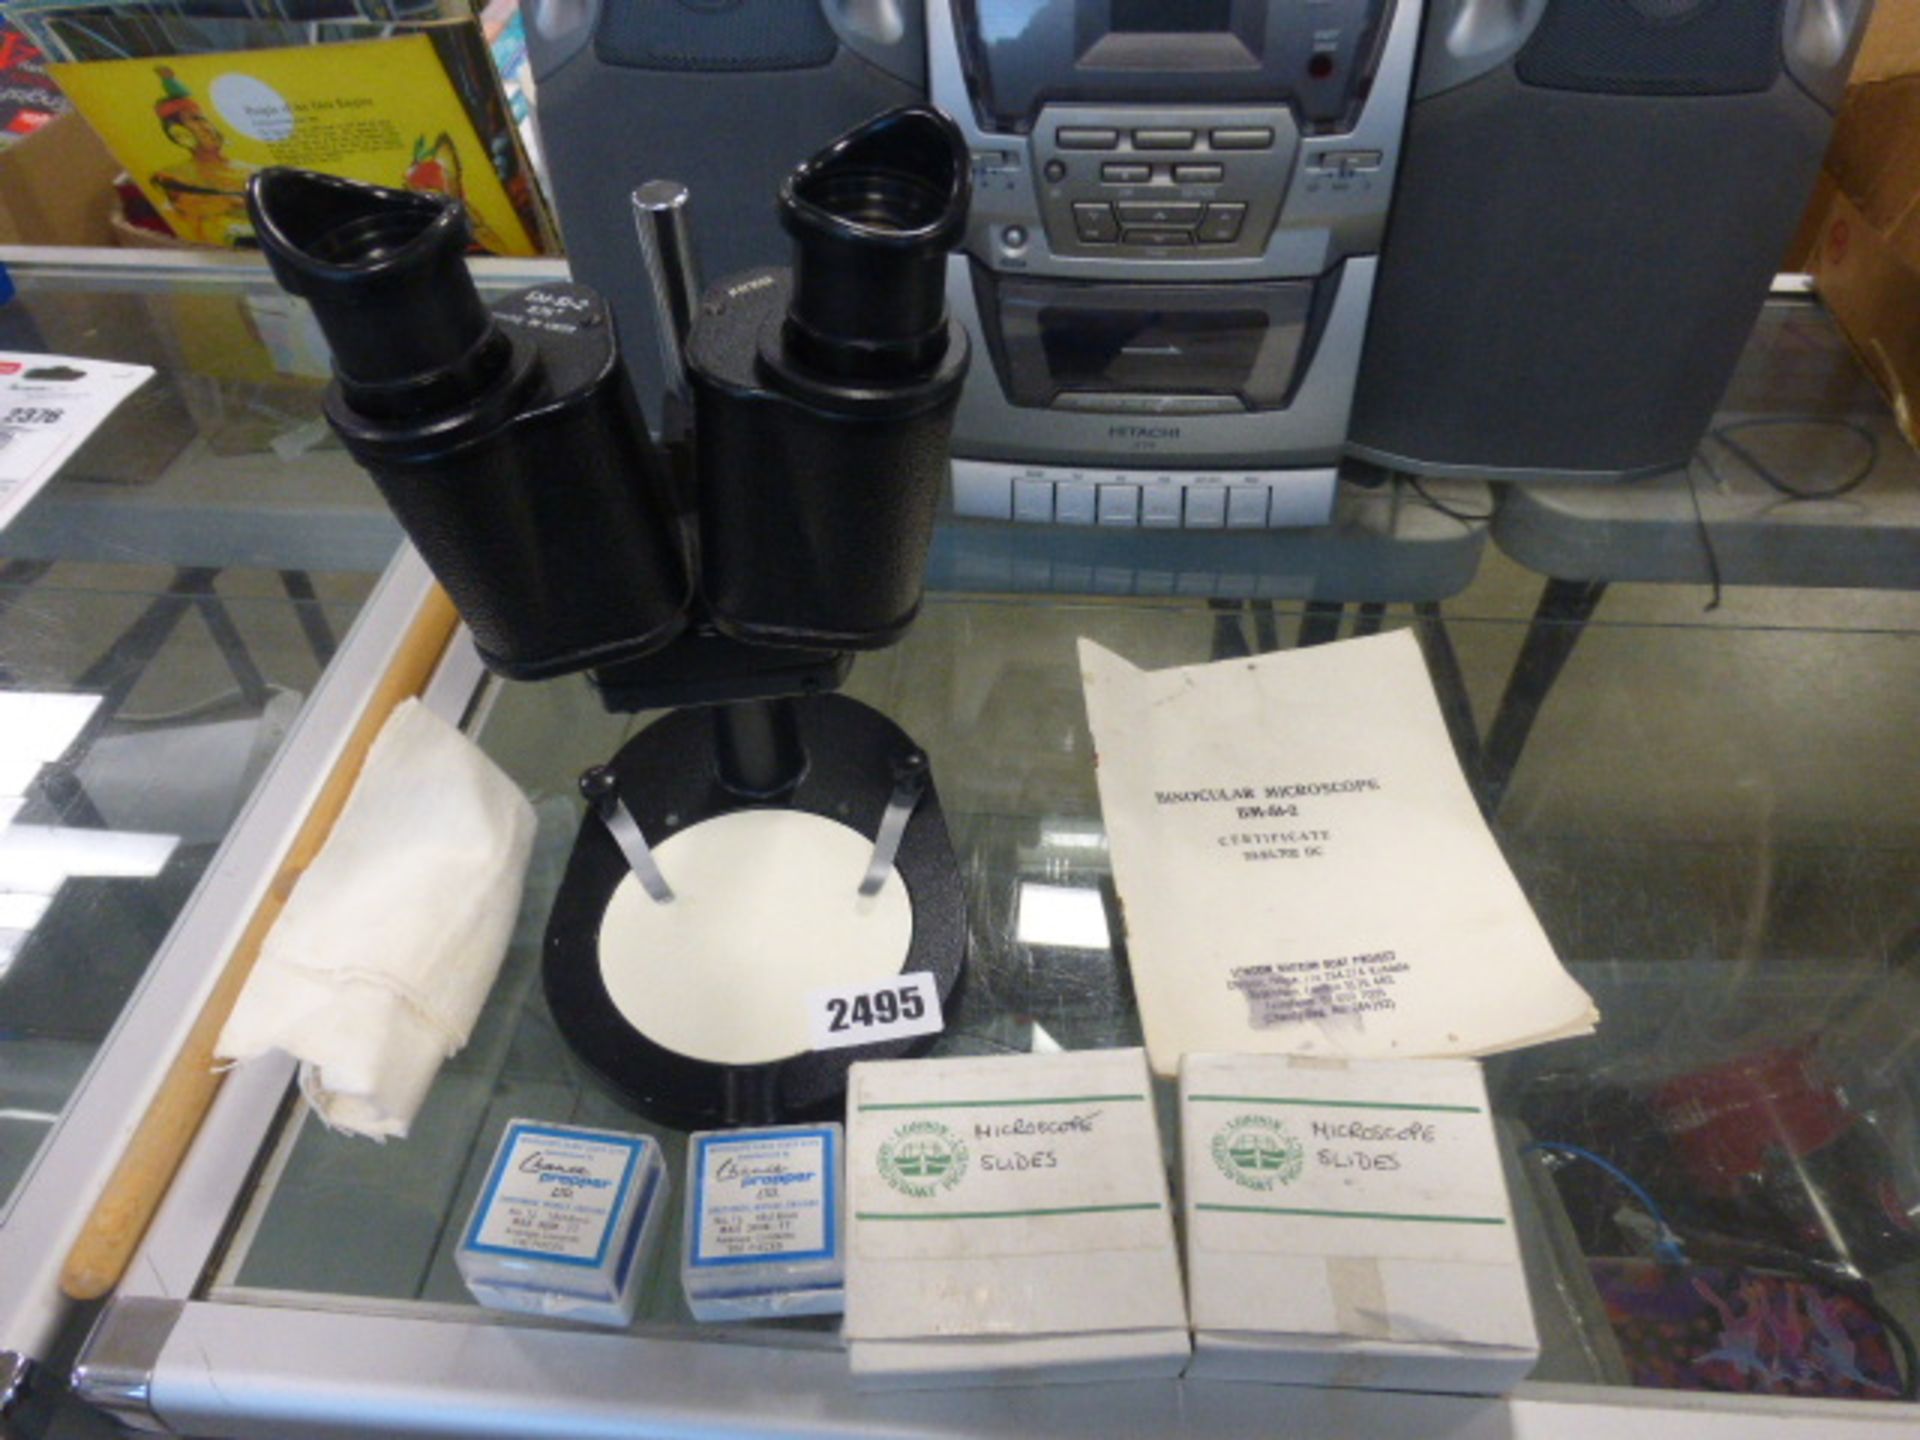 Binocular microscope with certificate and slides